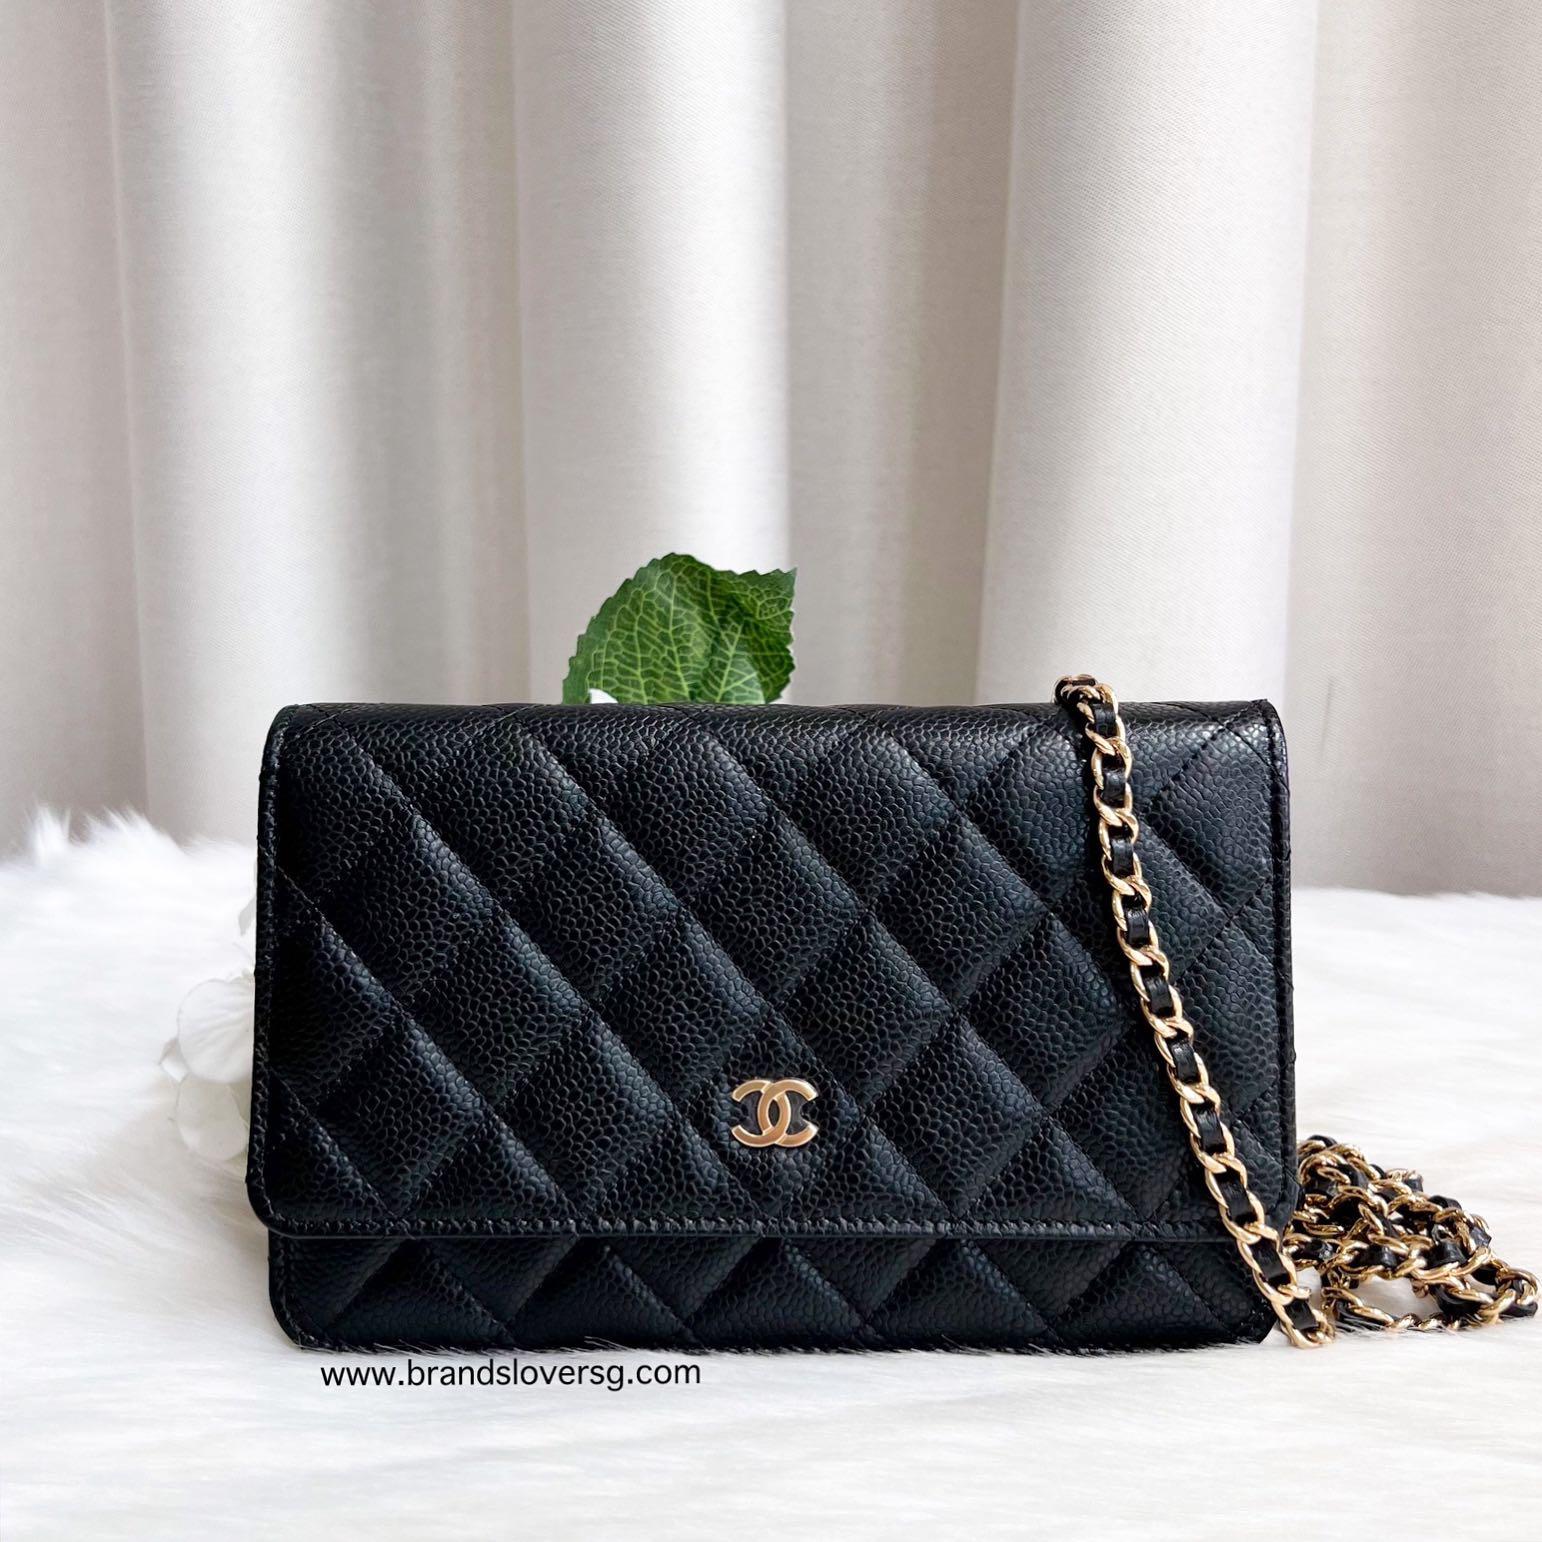 ✖️SOLD✖️ Chanel Classic Wallet on Chain WOC in Black Caviar GHW